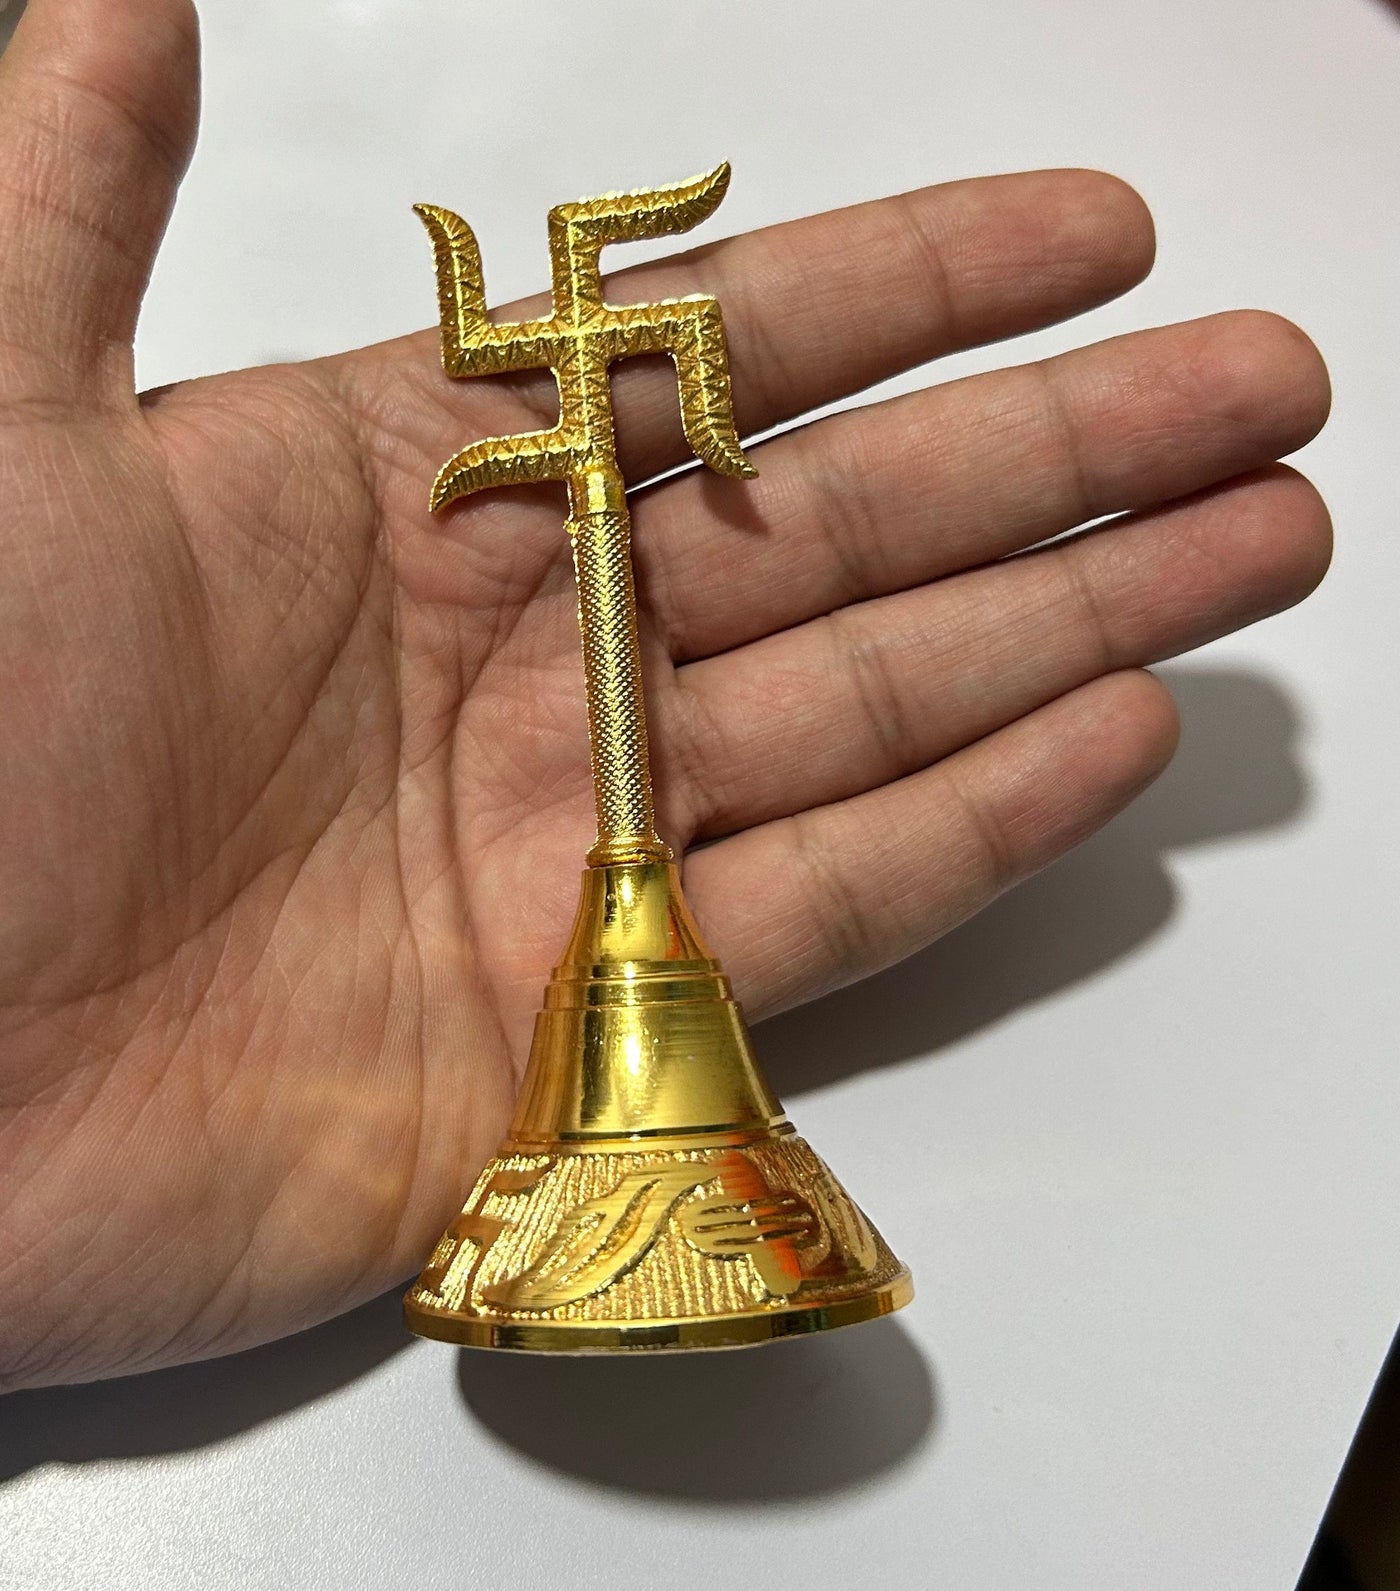 60 rs each on buying minimum 100 pcs / WhatsApp at 8619550223 to order 🏷️ bells for couple welcome LAMANSH Golden Swastik Bells 🔔Ghanti for Puja Mandir or mangal path ceremony giveaways | Bells for welcome in weddings / Return gifts 🎁 for puja ceremony